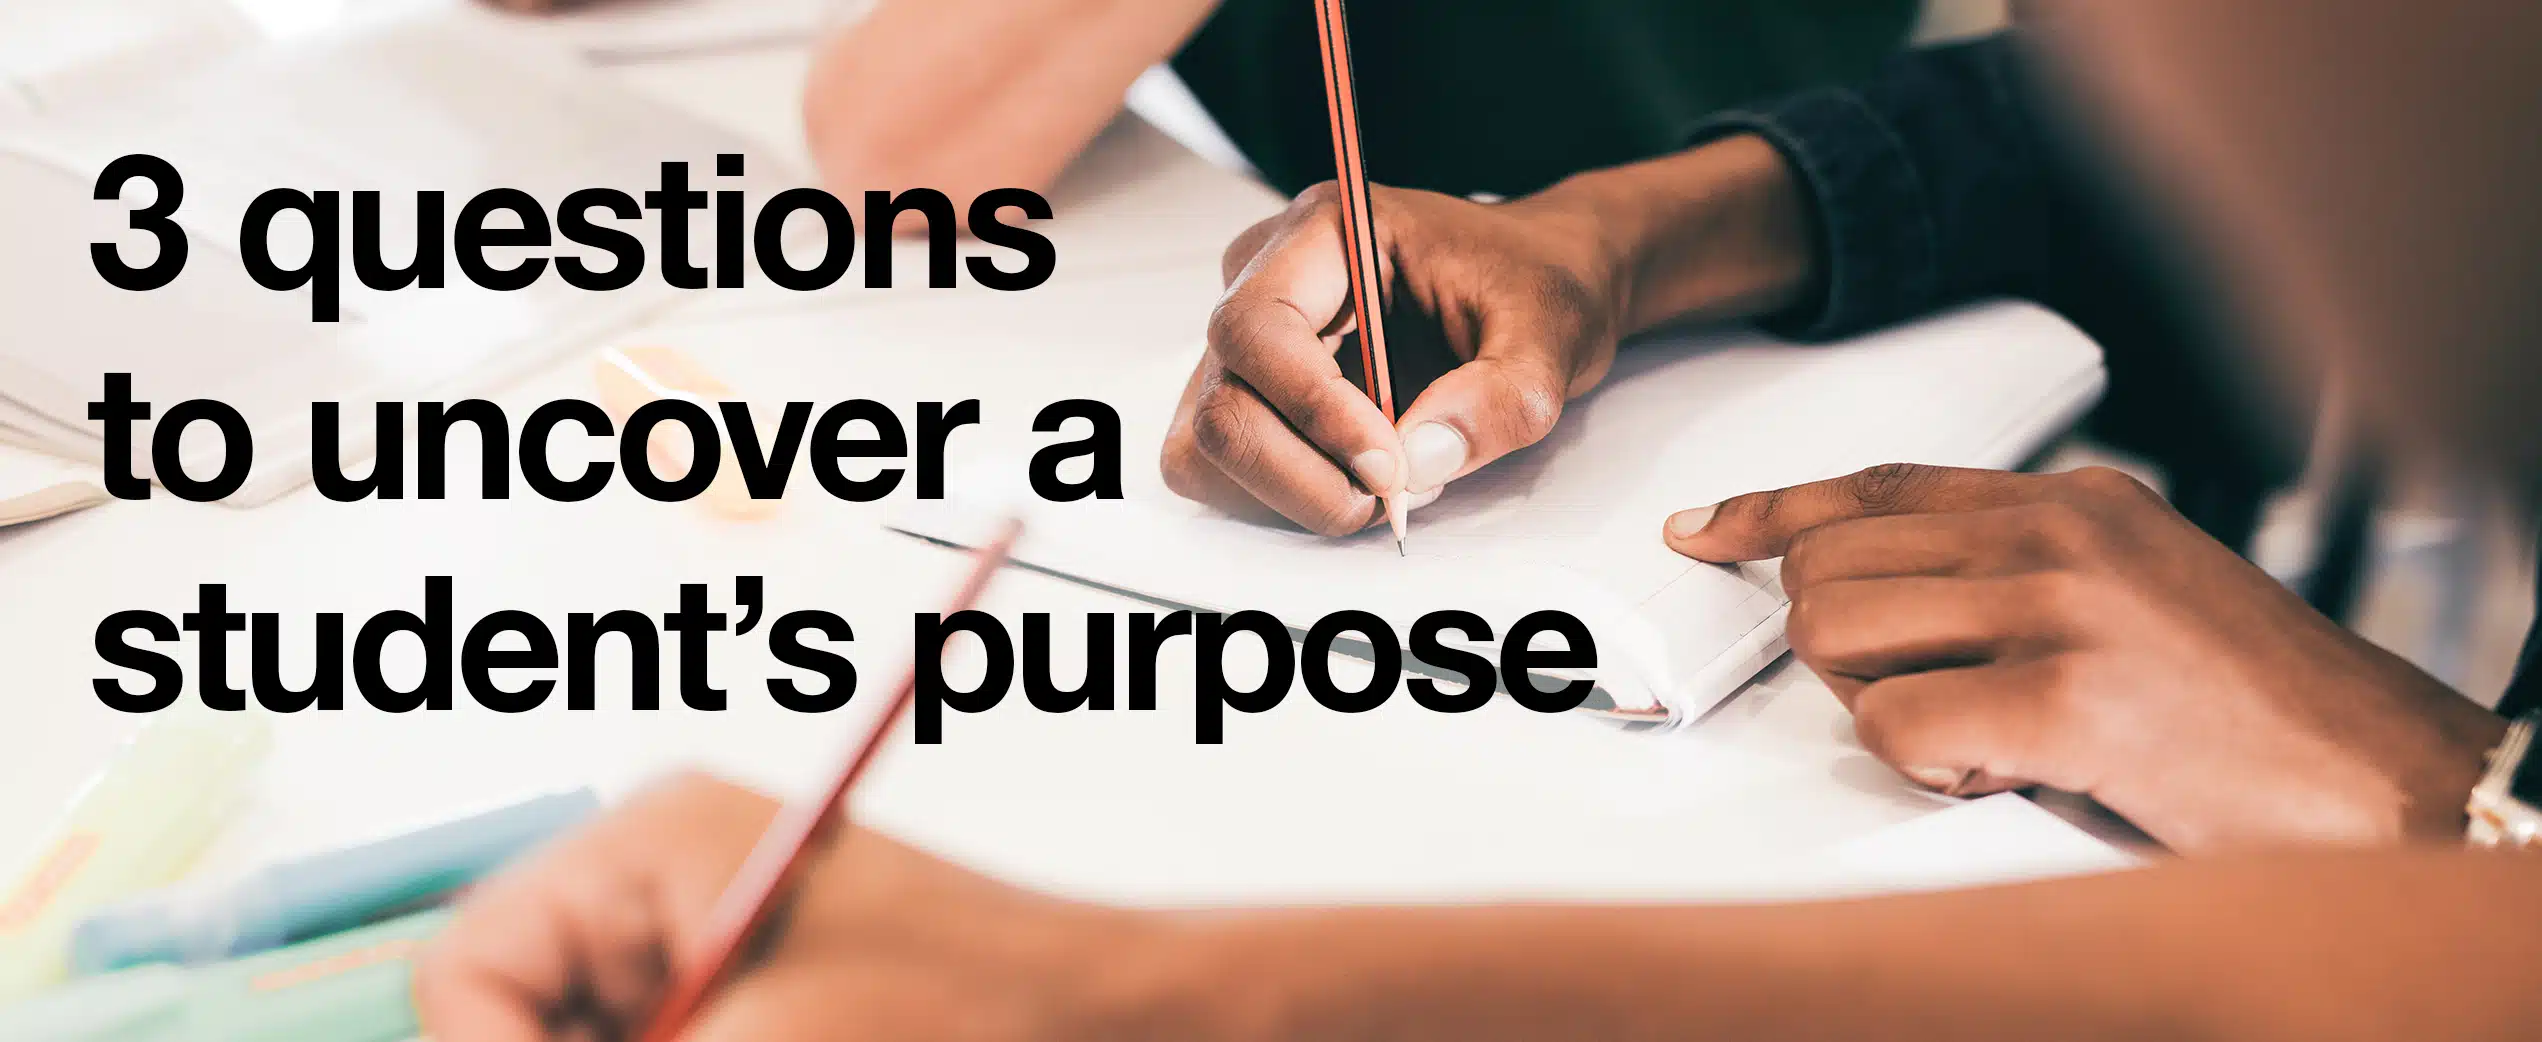 3 questions to uncover a student’s purpose